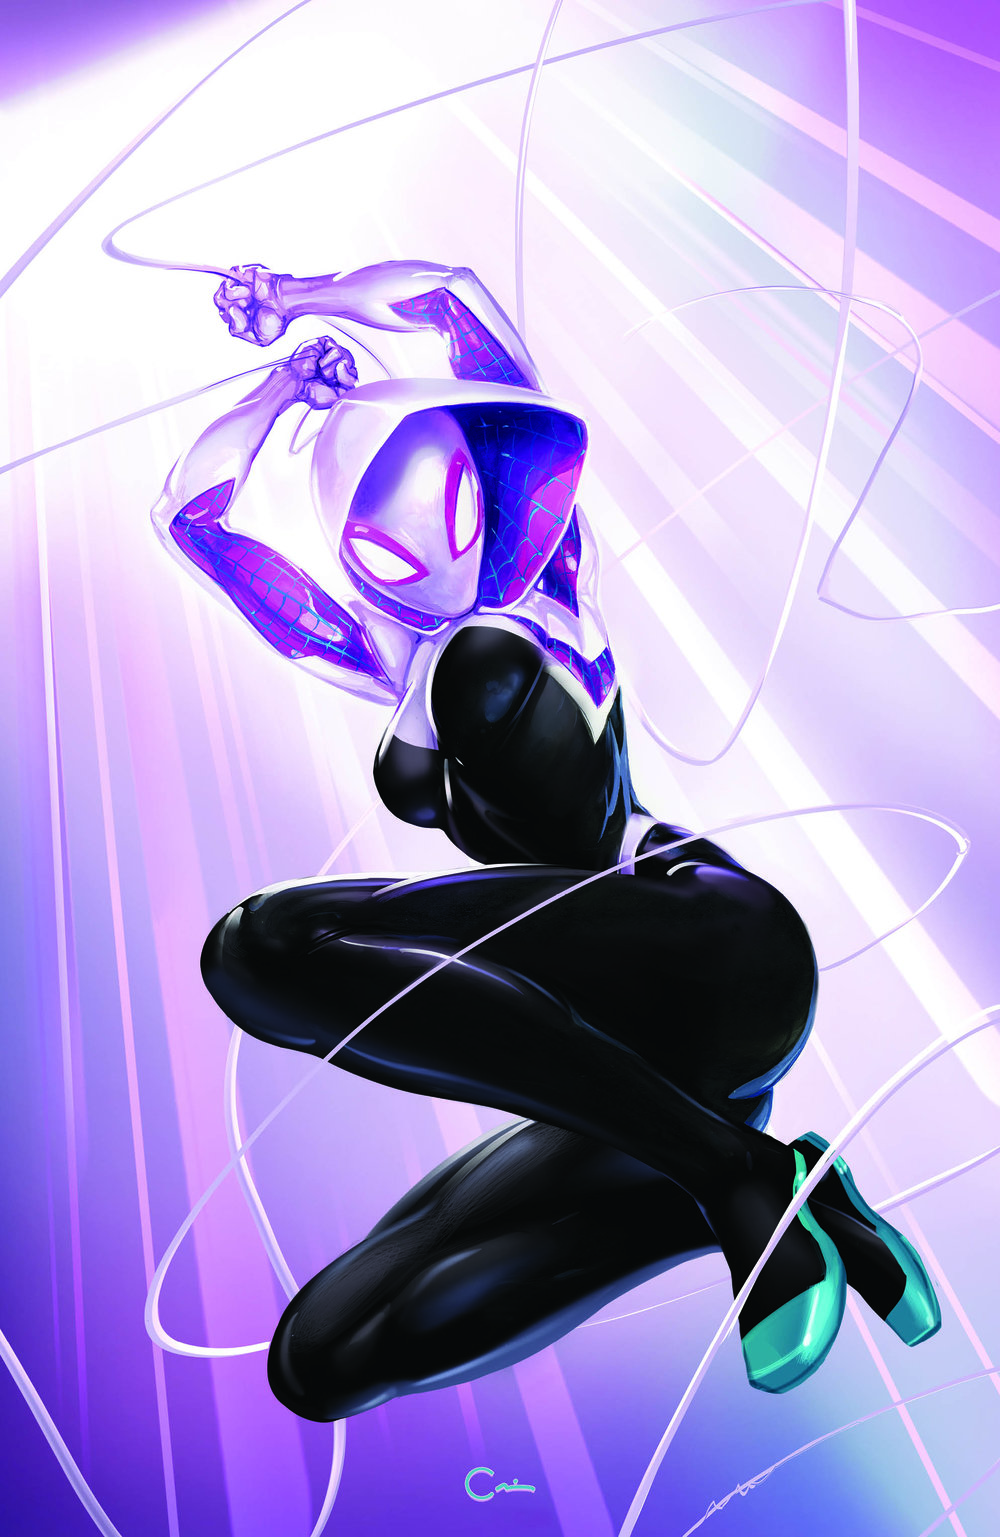 New ongoing series 'Spider-Gwen: The Ghost-Spider' coming April